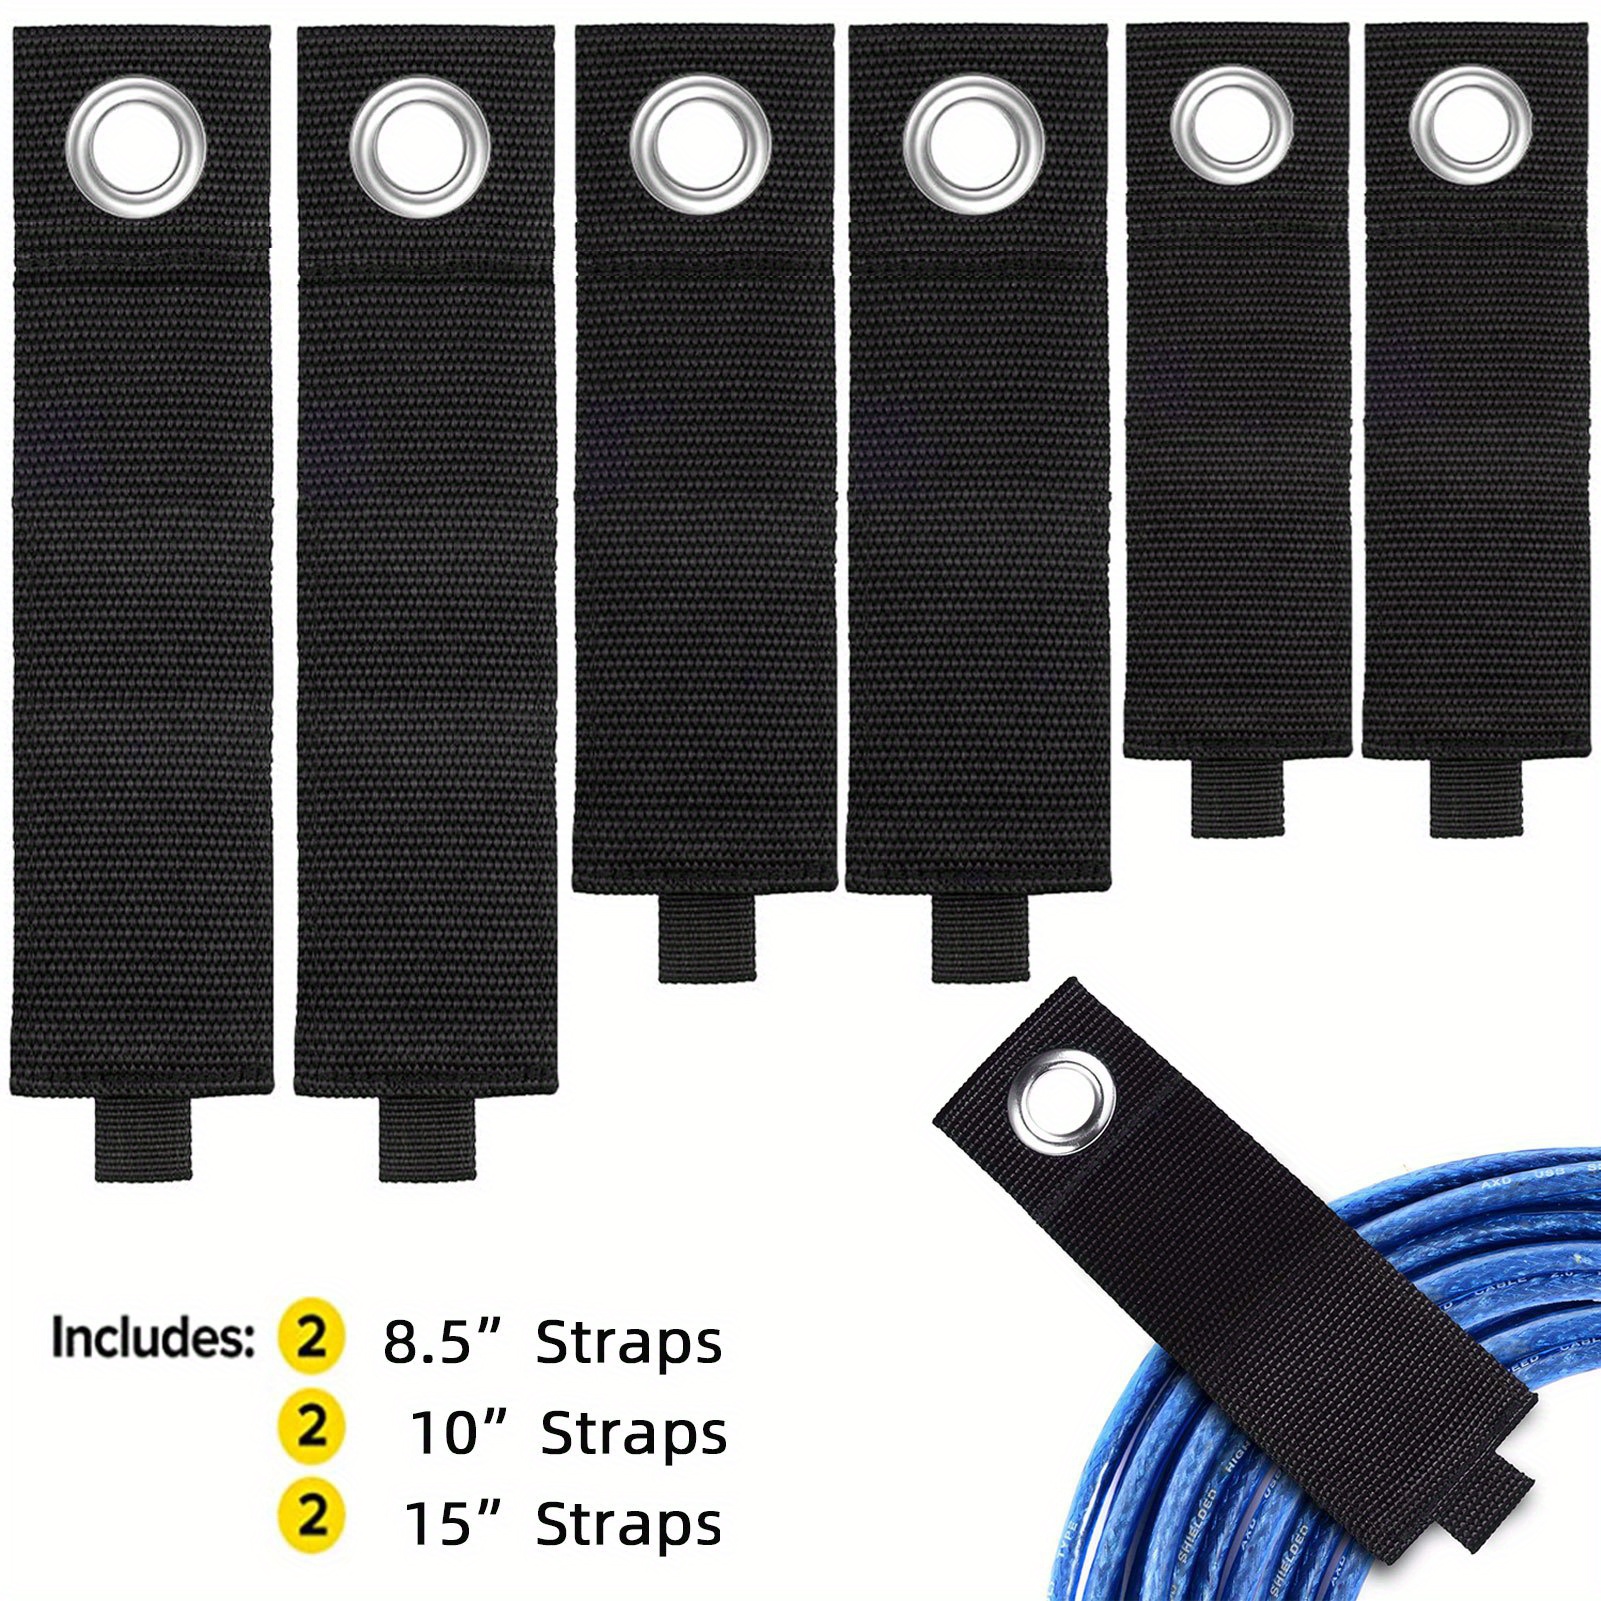 VELCRO Brand Easy Hang Strap, Heavy Duty Outdoor Storage Extension Cords,  Cables, Tools, Bikes, Organization for Garden, Shed, RV